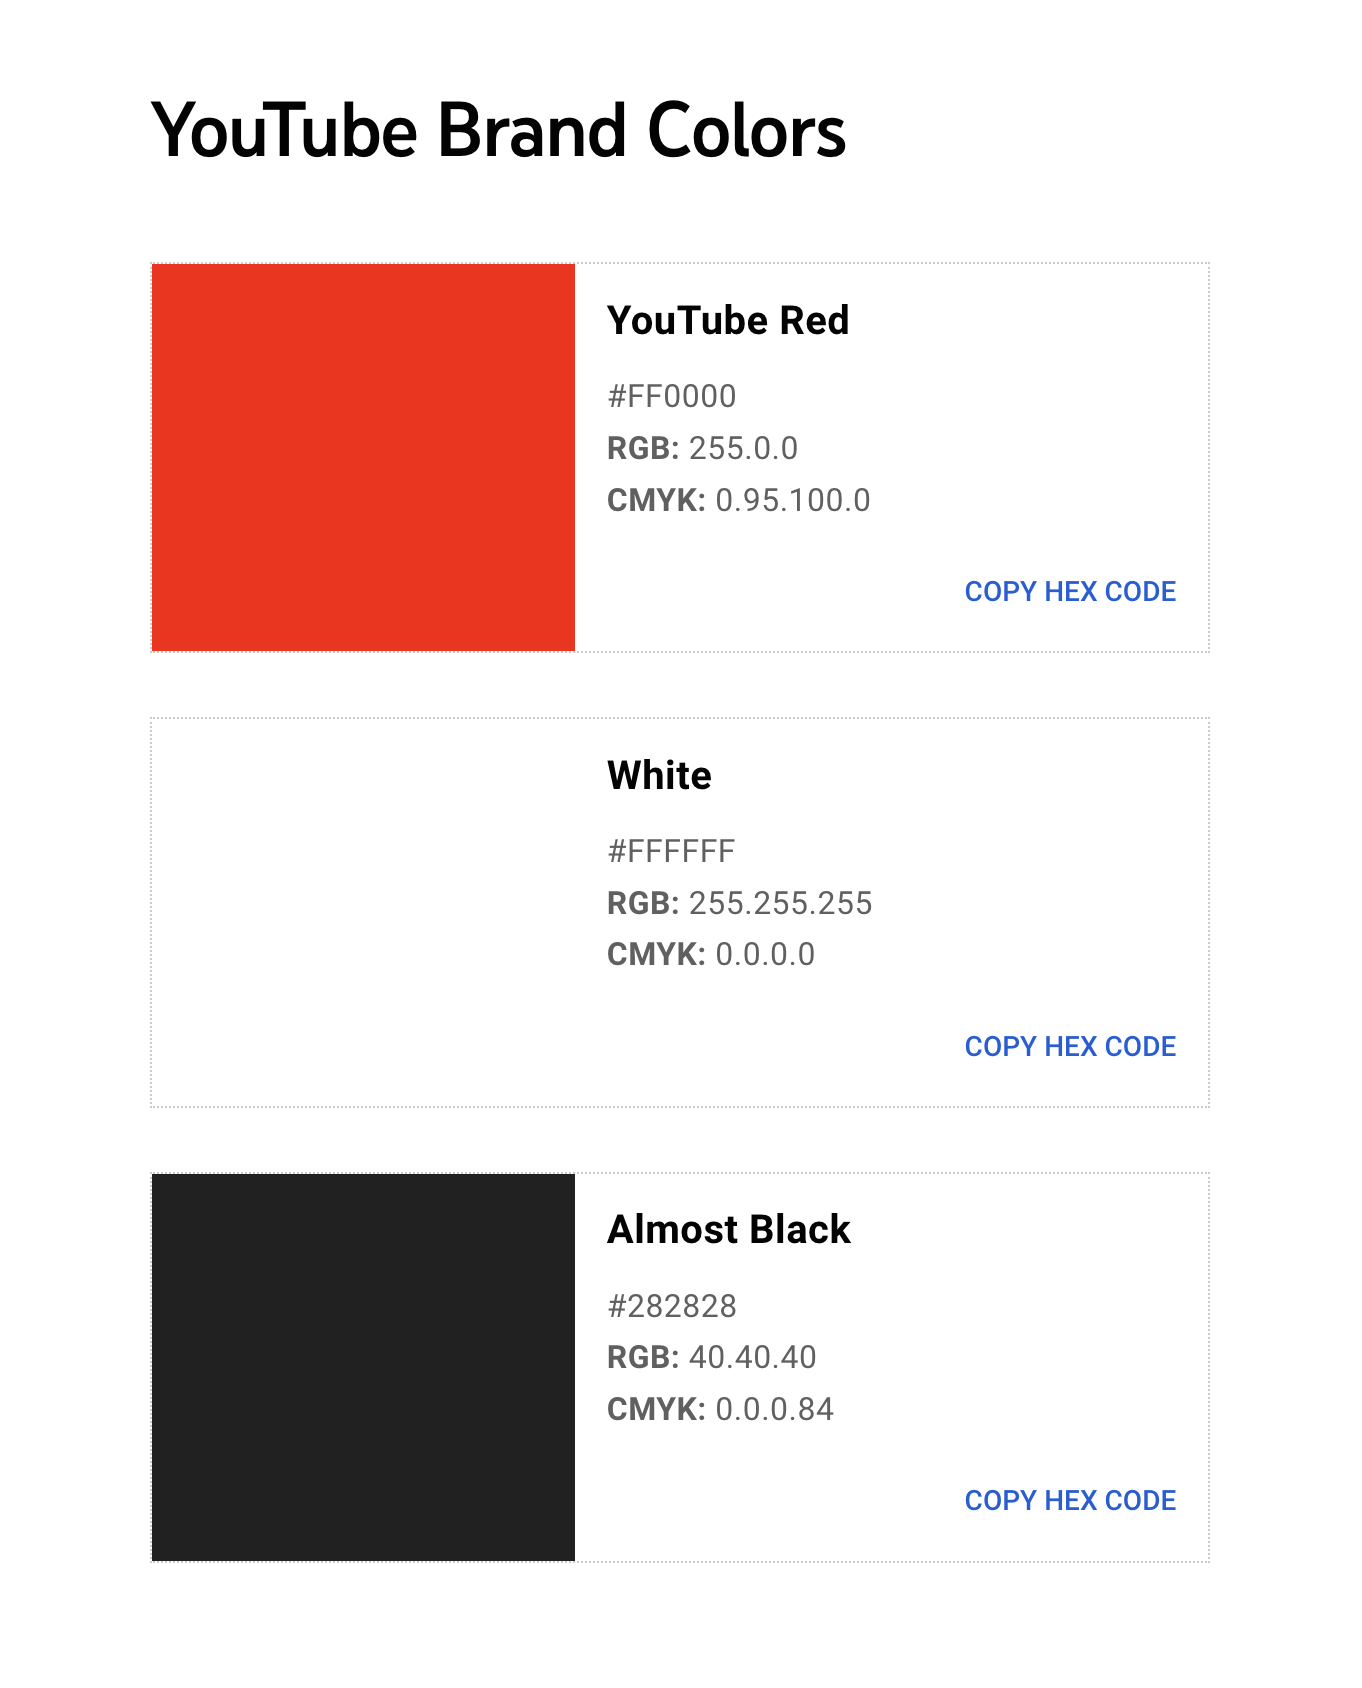 YouTube style guide has a section with brand colors for proper use on websites and online materials.